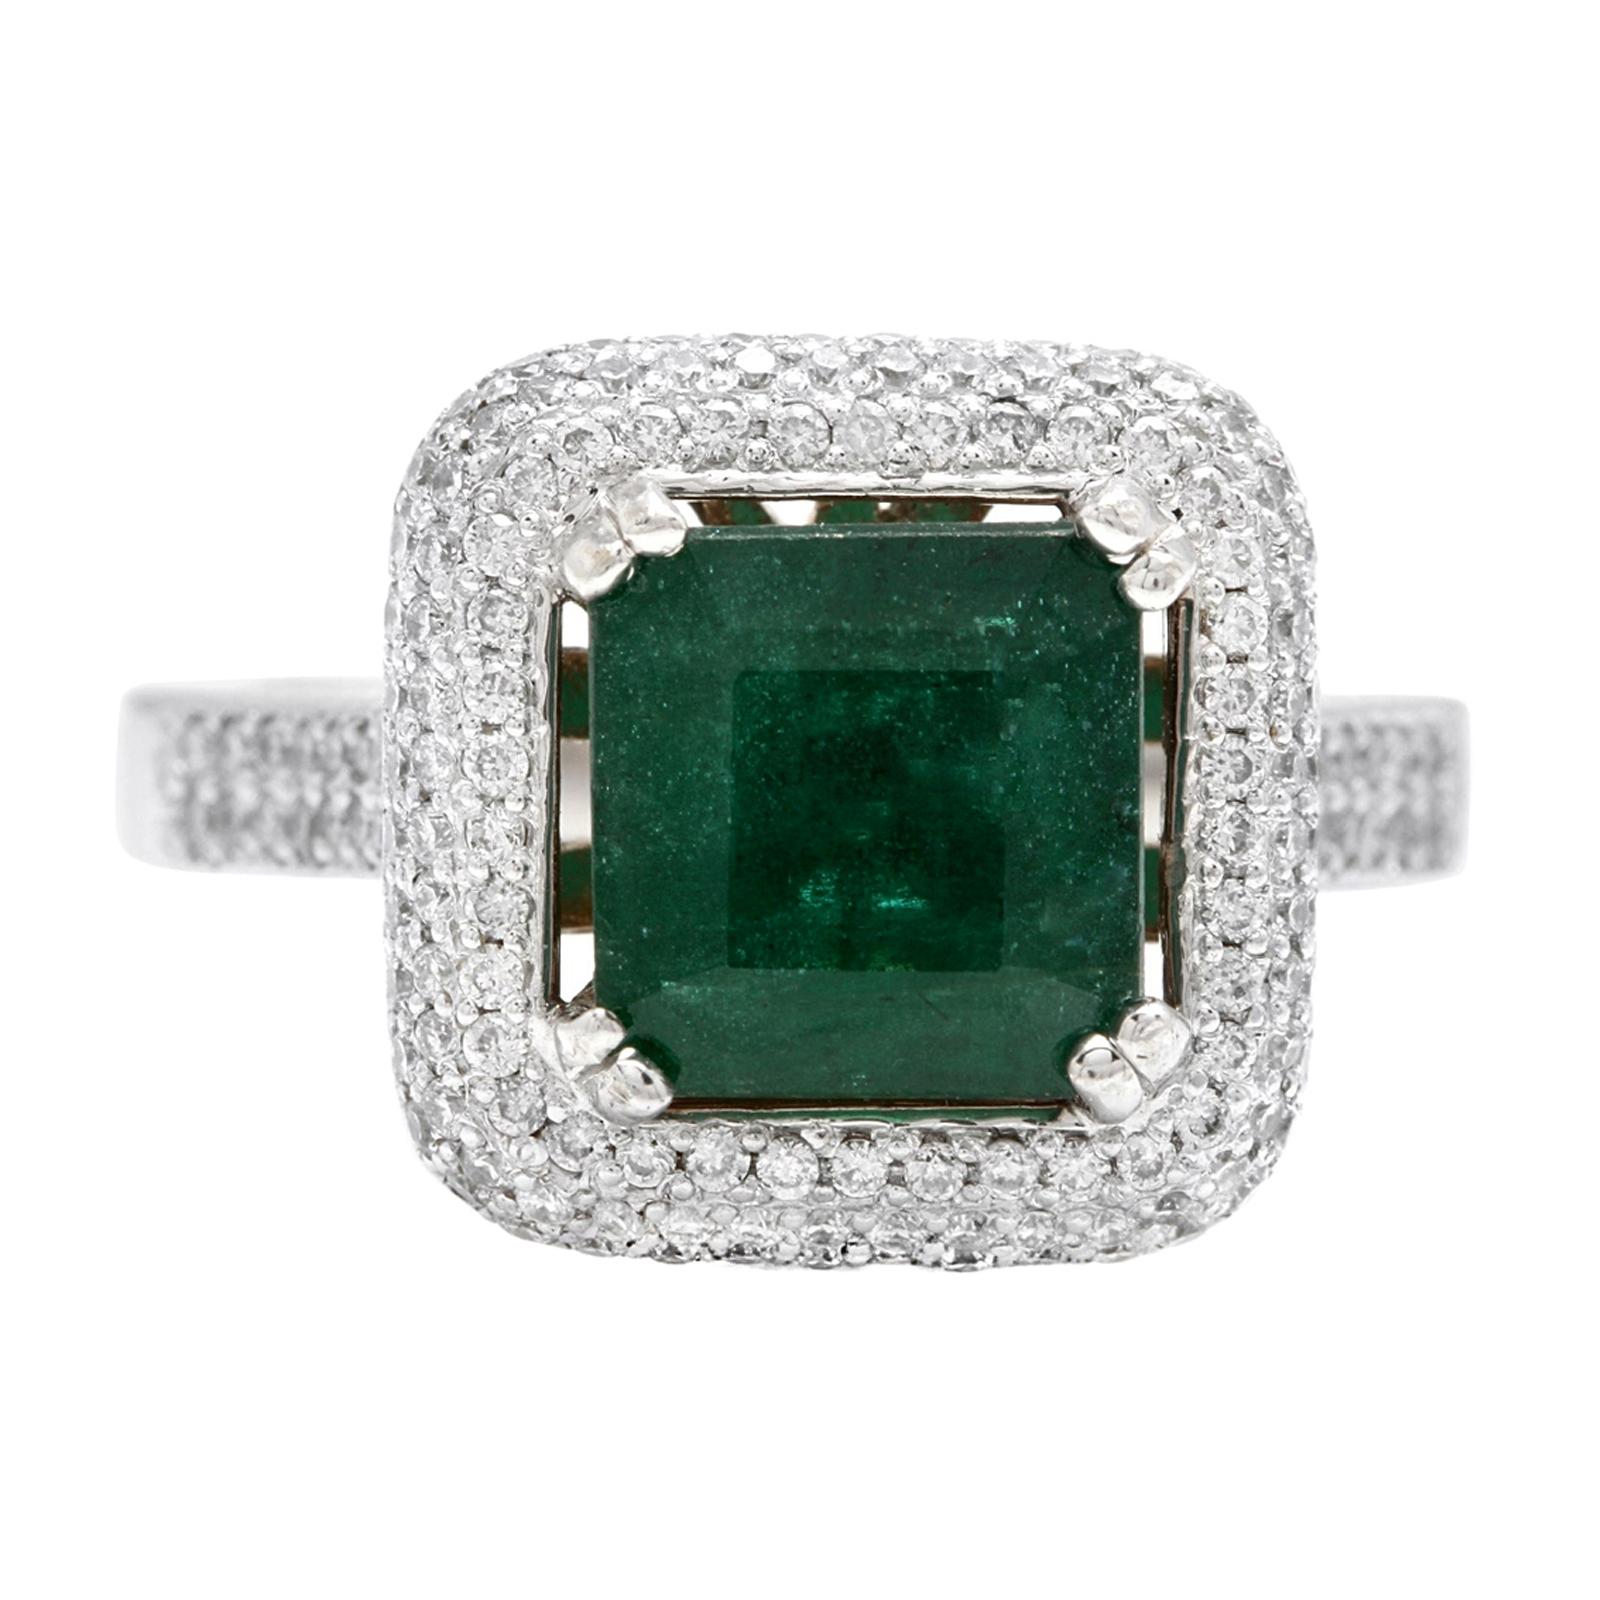 3.45ct Natural Emerald & Diamond 14k Solid White Gold Ring